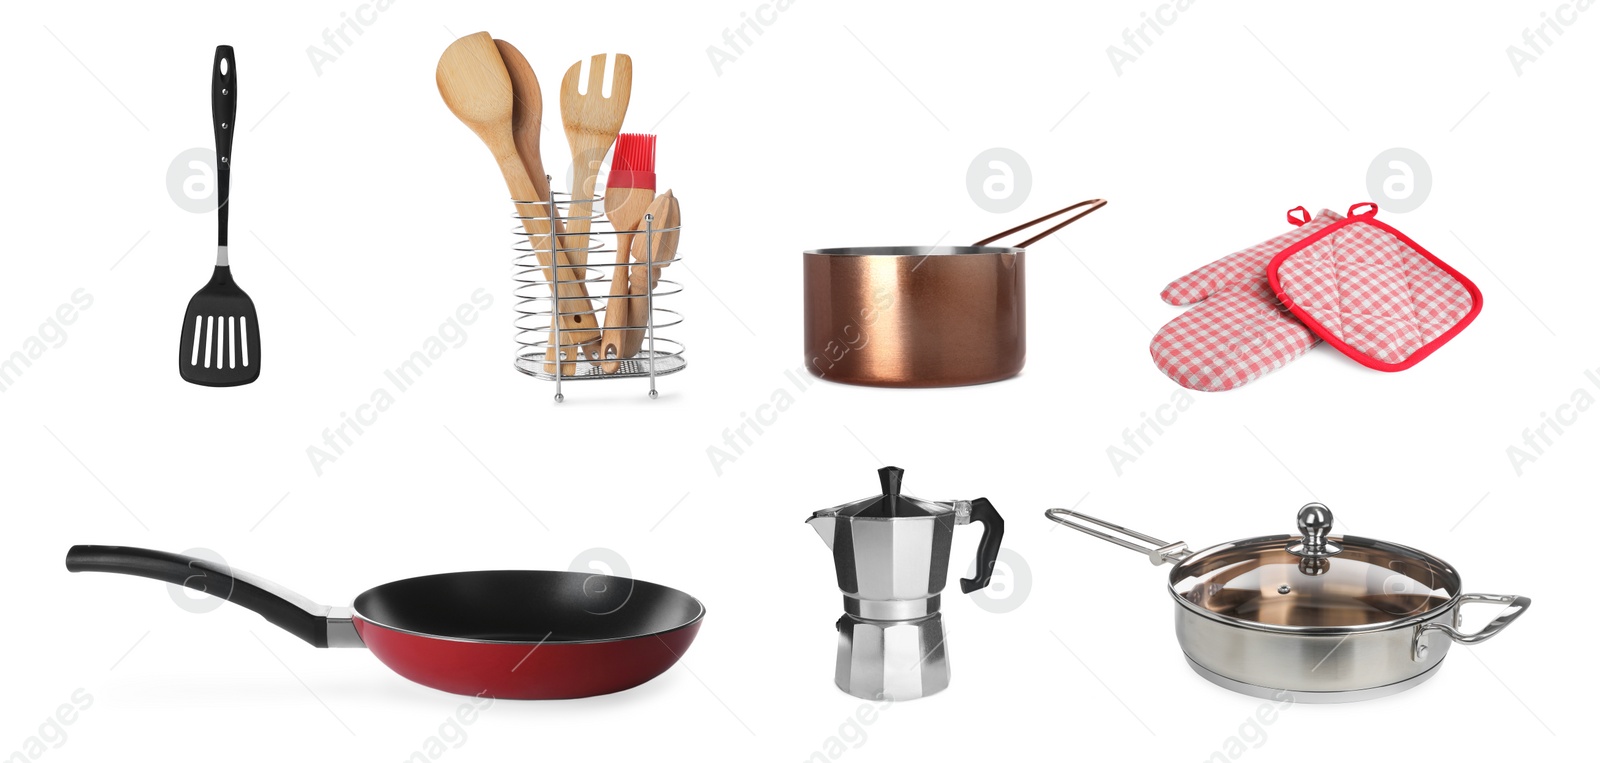 Image of Set with pans, cookware and kitchen utensils on white background